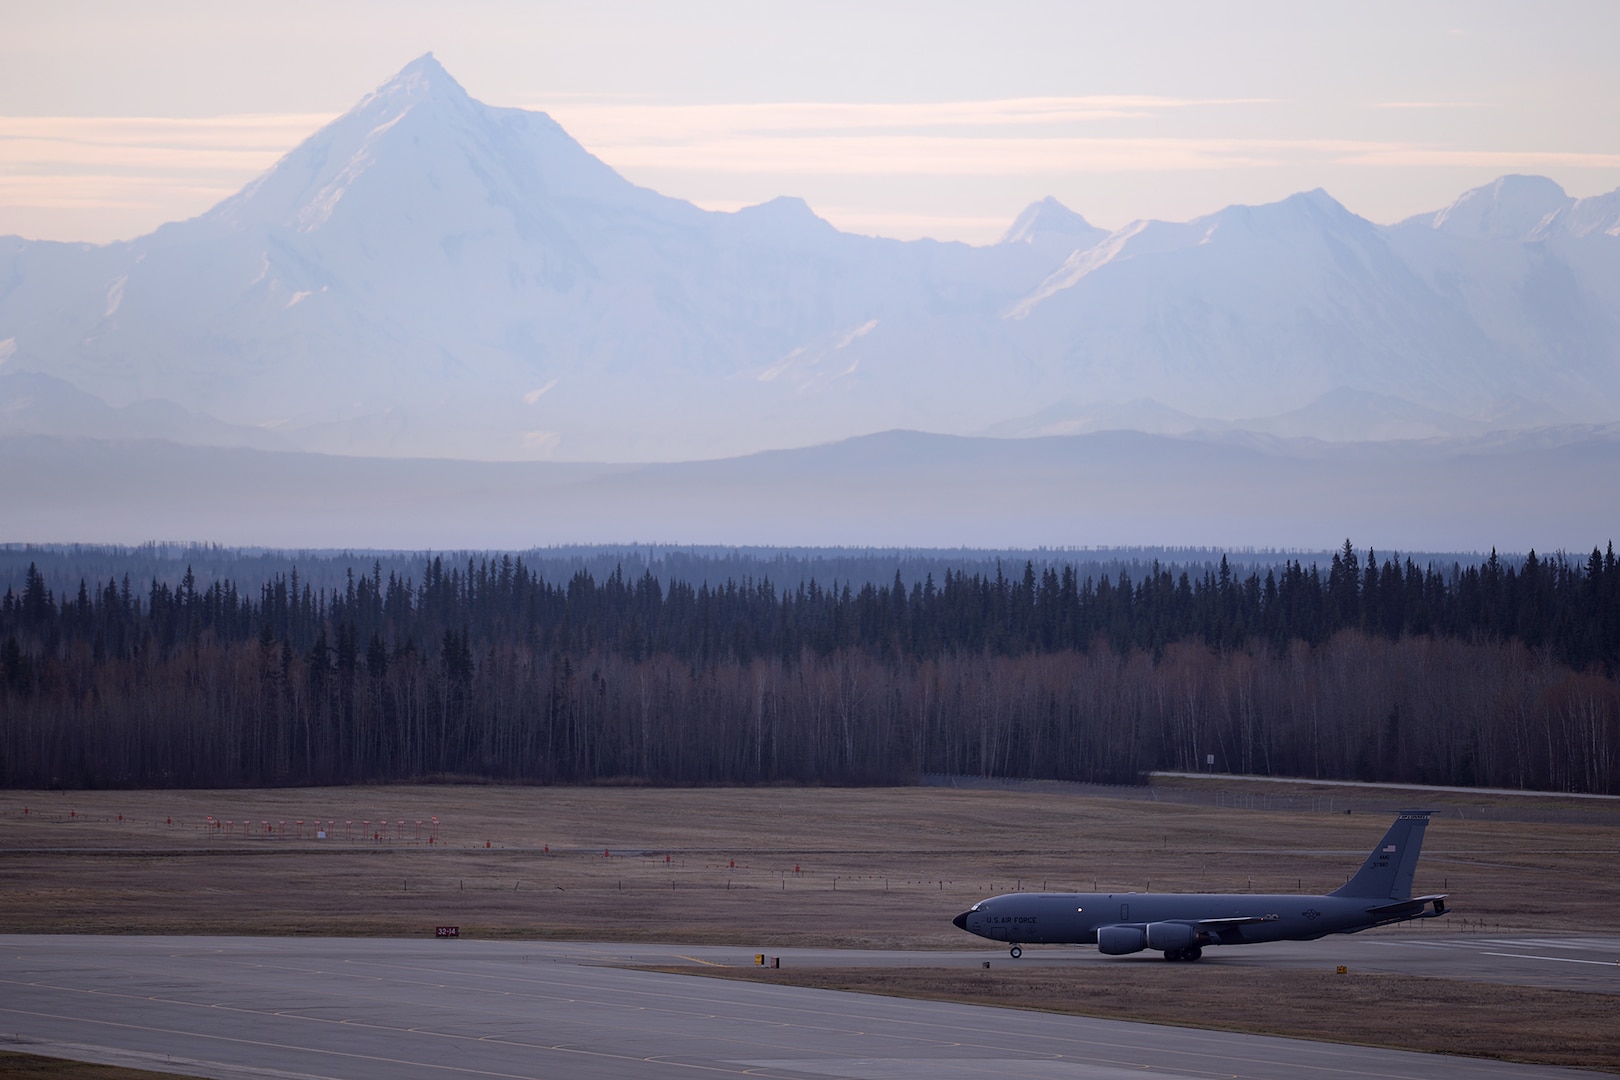 A U.S. Air Force KC-135 Stratotanker assigned to the 22nd Air Refueling Wing out of McConnell Air Force Base, Kan., returns to Eielson Air Force Base, Alaska, Oct. 10, 2016, after completing its first RED FLAG-Alaska (RF-A) 17-1 mission. The Tanker Task Force provides a crucial aerial refueling capability for this Pacific Air Forces commander-directed field training exercise, enabling missions conducted within the Joint Pacific Alaska Range Complex, which provides more than 67,000 square miles of combat training airspace for U.S. and international partners. (U.S. Air Force photo by Master Sgt. Karen J. Tomasik)